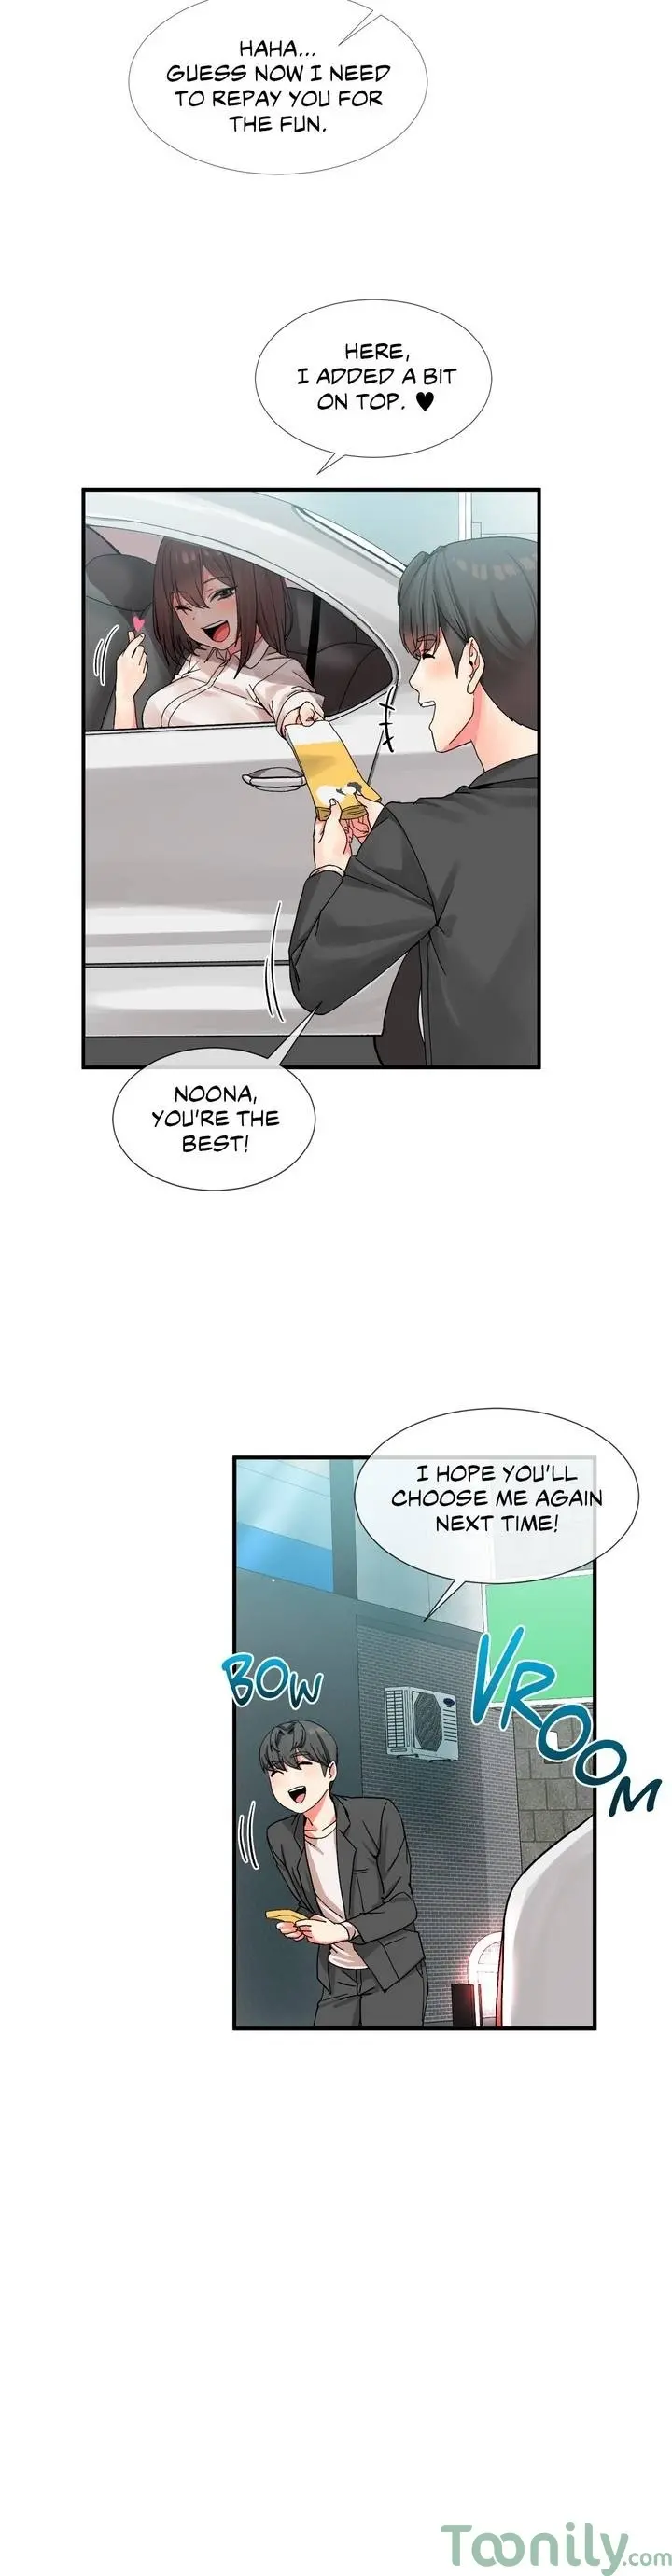 Deceptions - Chapter 1 Page 28